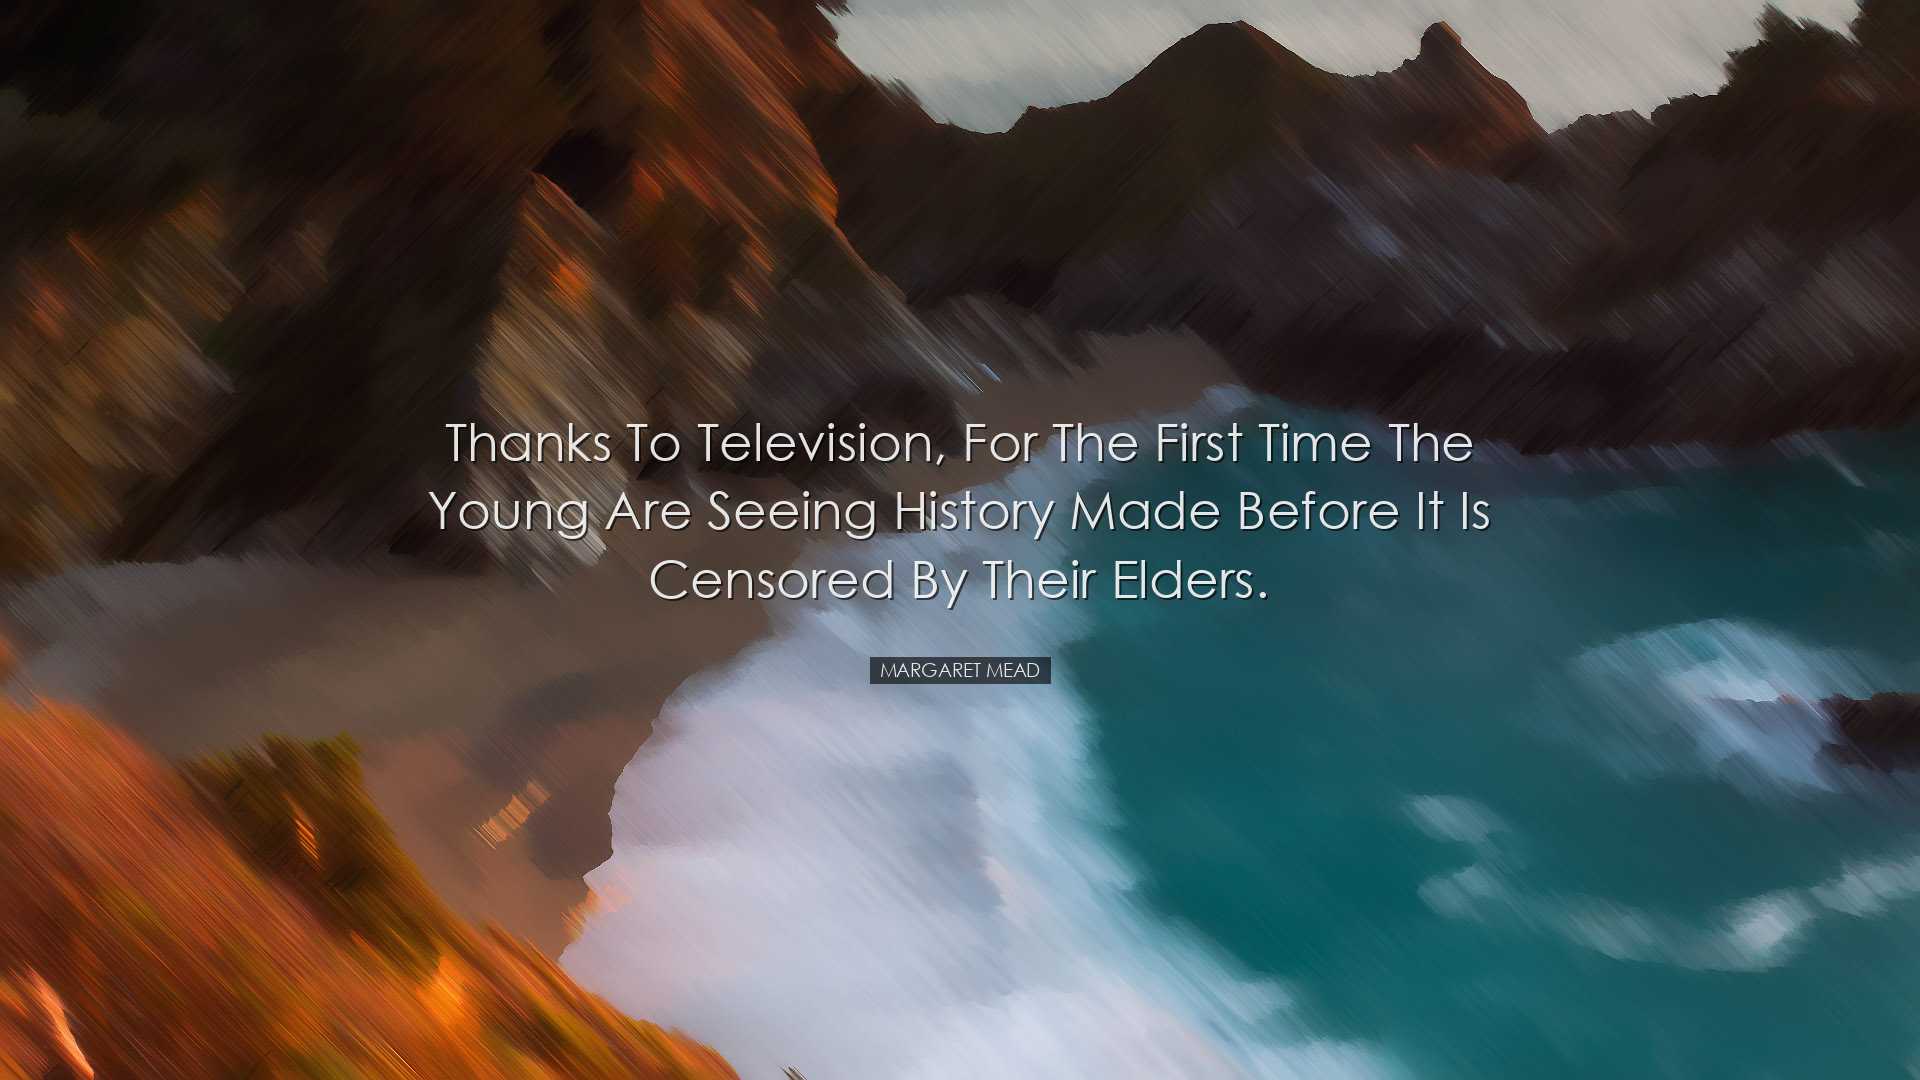 Thanks to television, for the first time the young are seeing hist